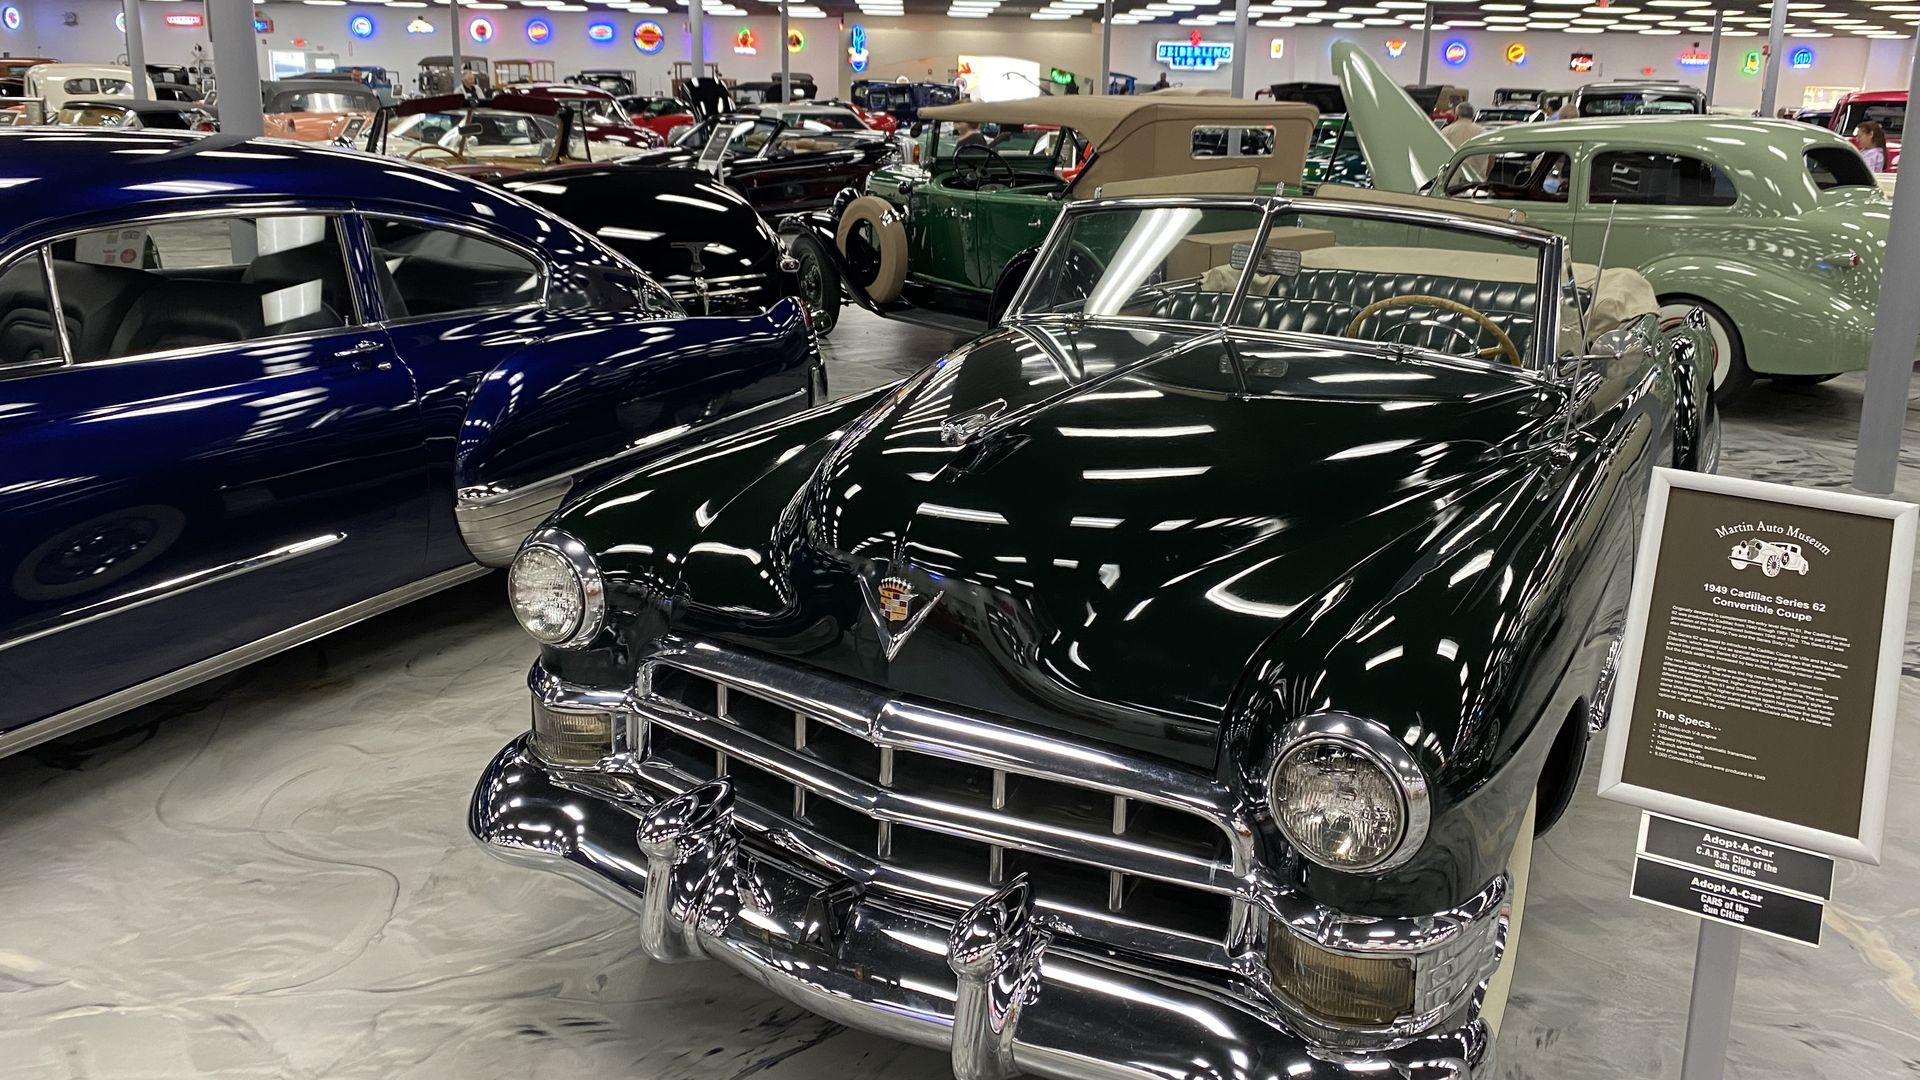 Rows of classic cars on display in a large museum showroom.